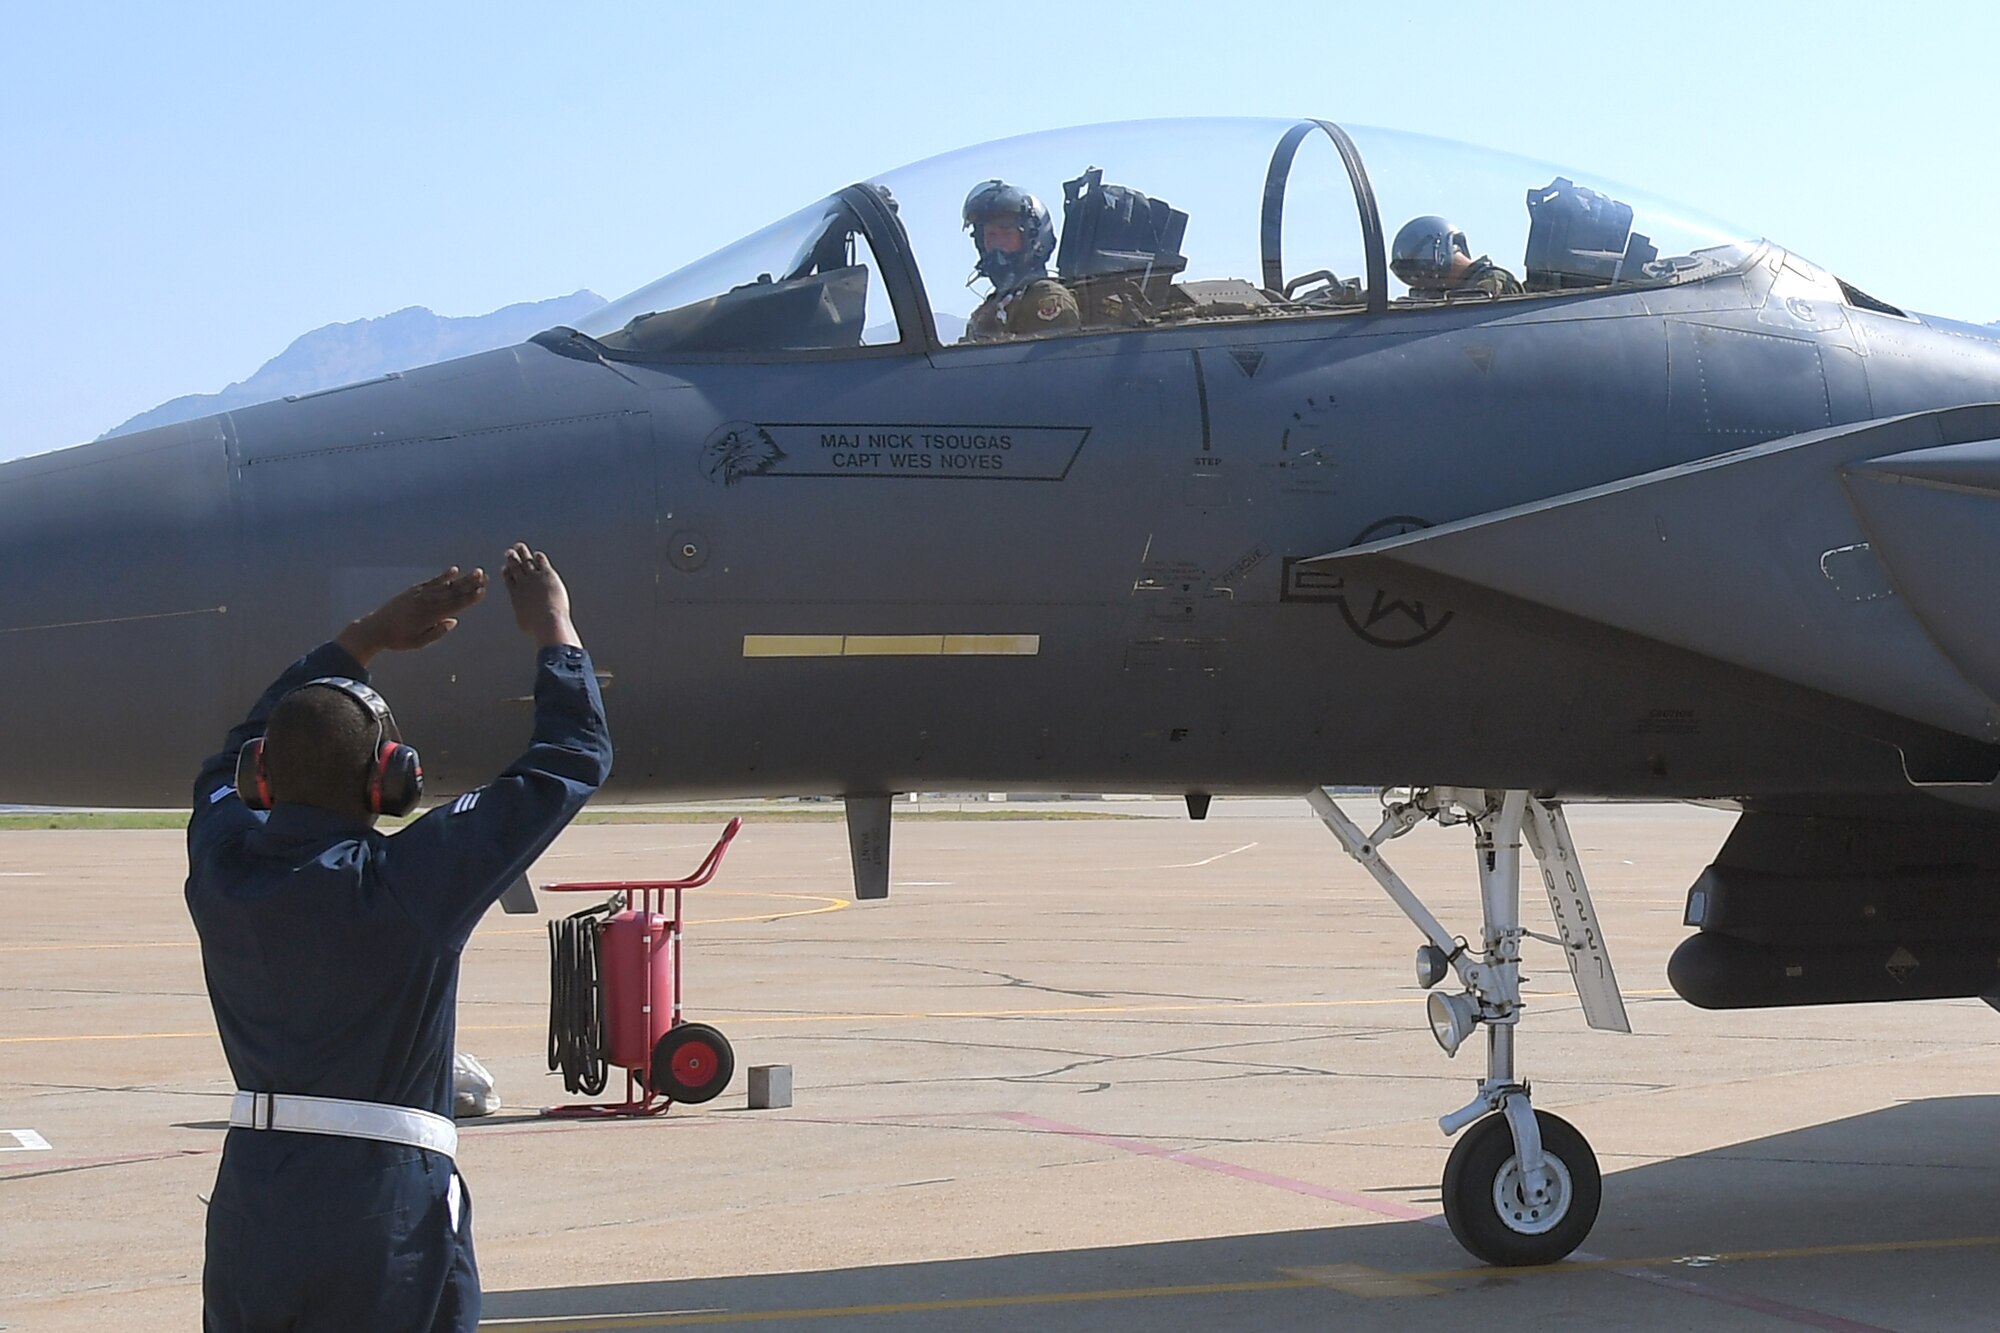 Senior Airman Deandre Moment, 389th Fighter Squadron, directs an F-15E Strike Eagle returning from a training mission Aug. 15, 2018, at Hill Air Force Base, Utah. The 389th FS at Mountain Home Air Force Base, Idaho, were at Hill AFB to participate in the Air Force’s Weapons System Evaluation Program known as Combat Hammer. (U.S. Air Force photo by Todd Cromar)   (U.S. Air Force photo by Todd Cromar)